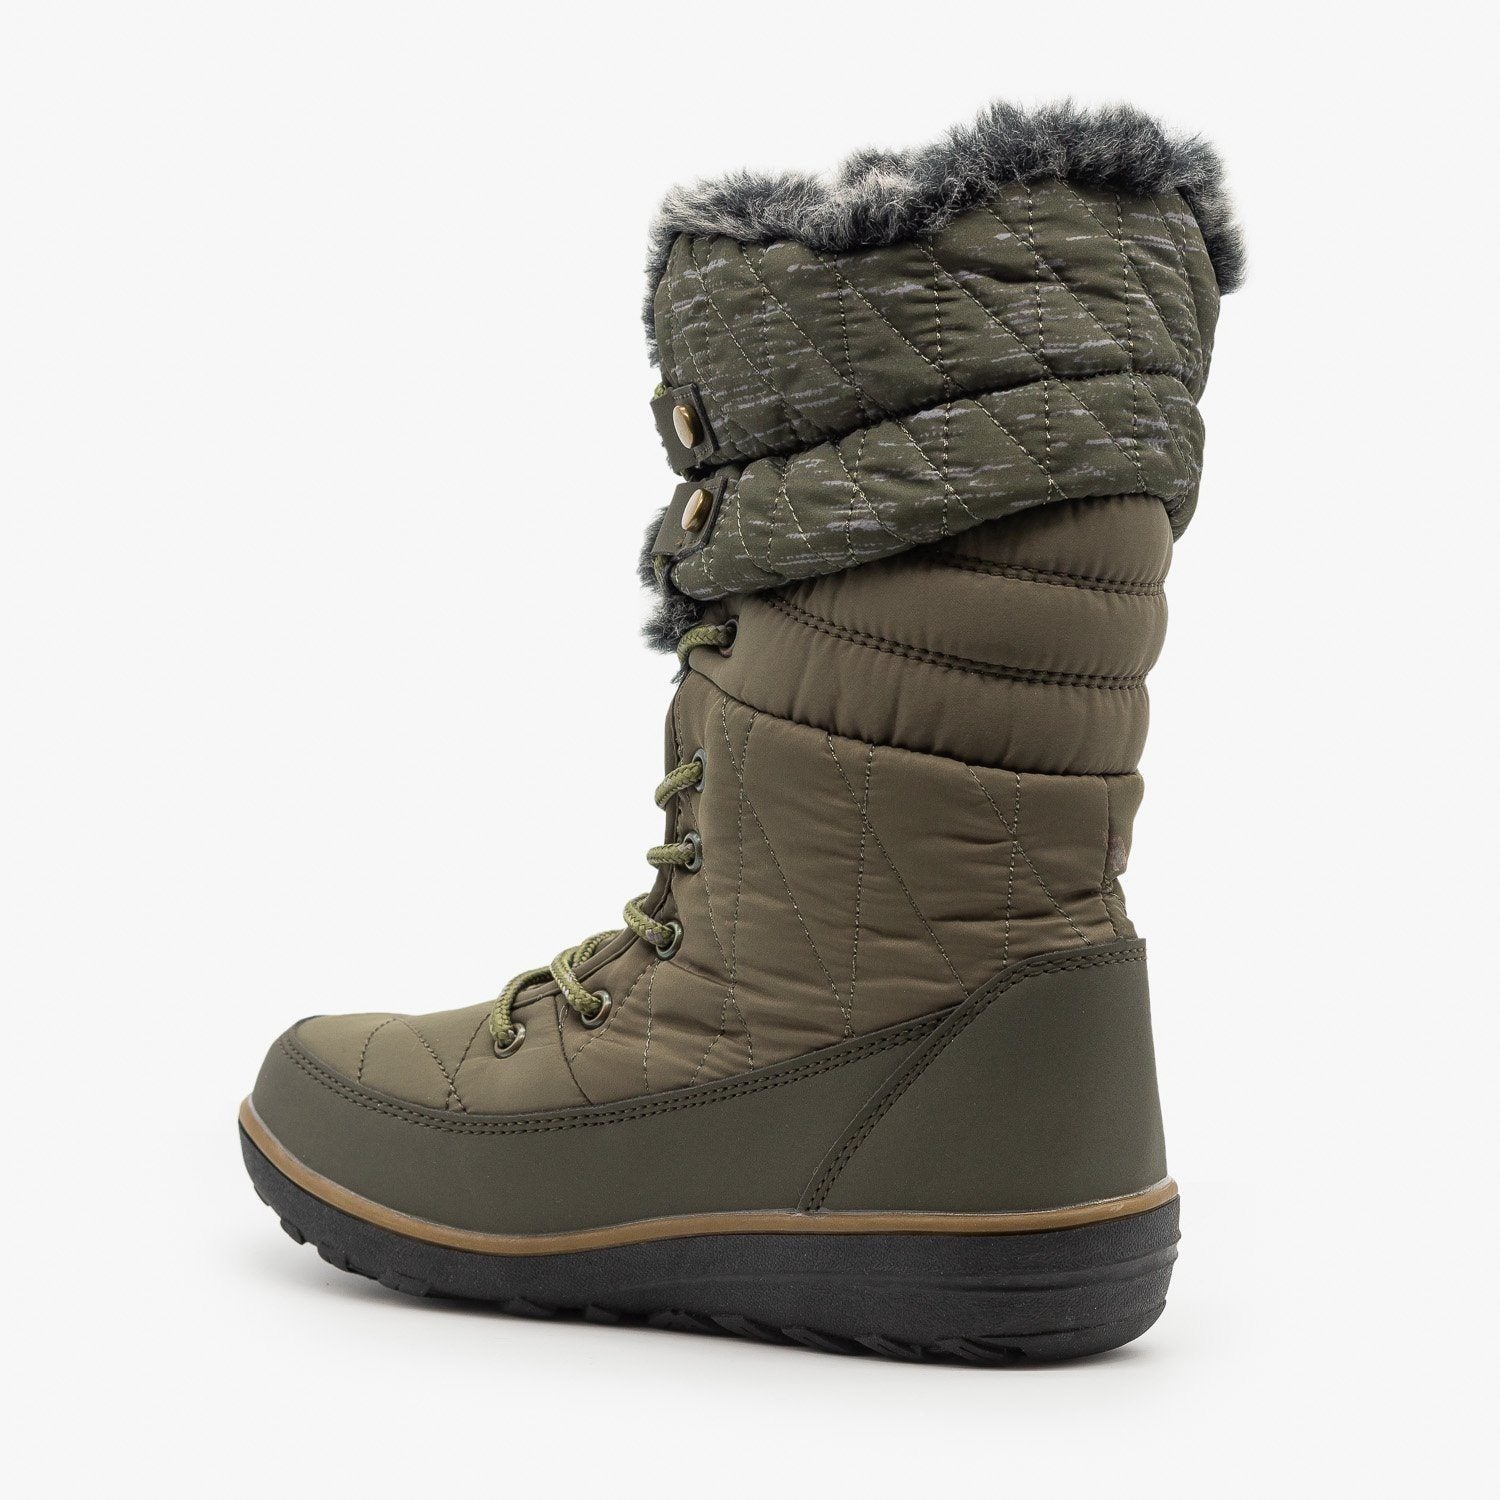 sporty winter boots